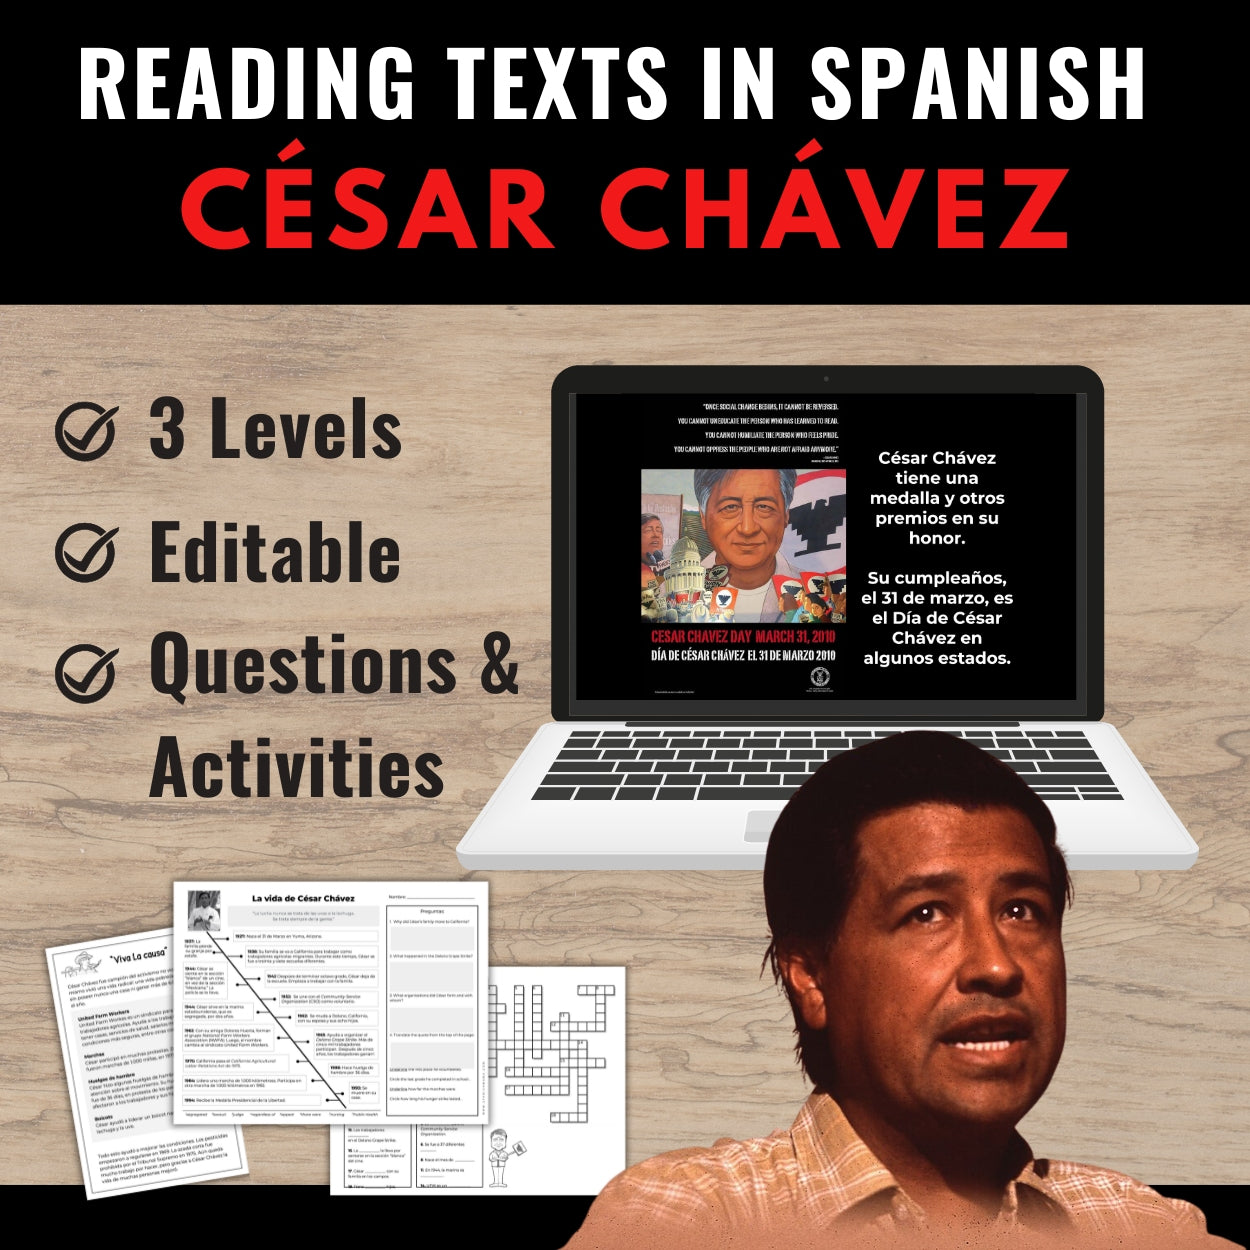 César Chávez Reading Passages and Activities in Spanish